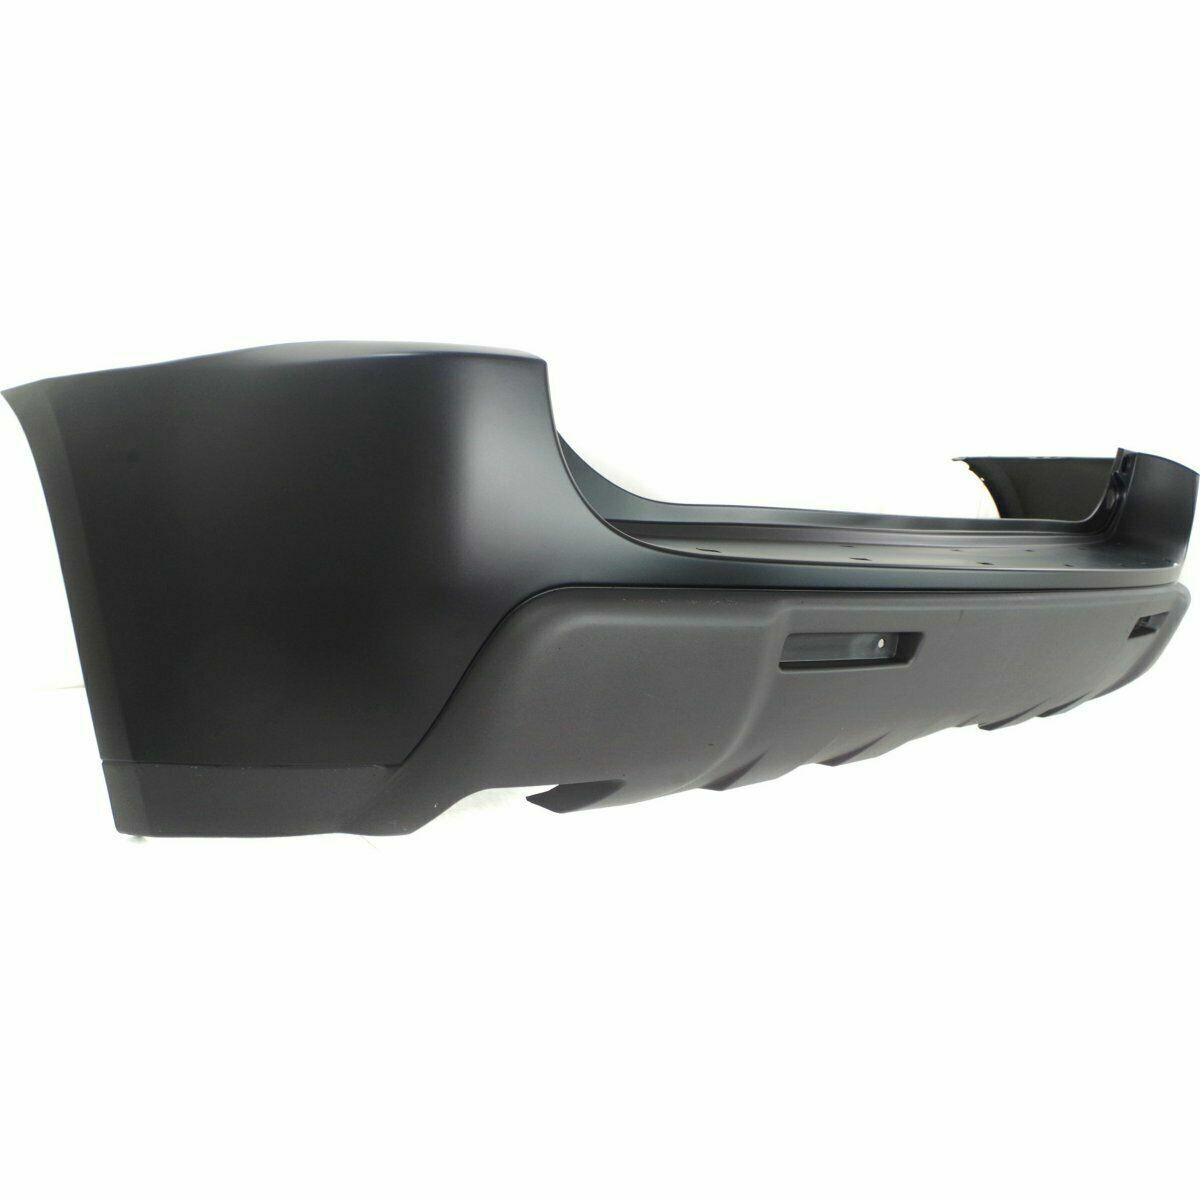 2005-2006 CHEVY EQUINOX; Rear Bumper Cover; LS/LT PTD Top Lower Painted to Match